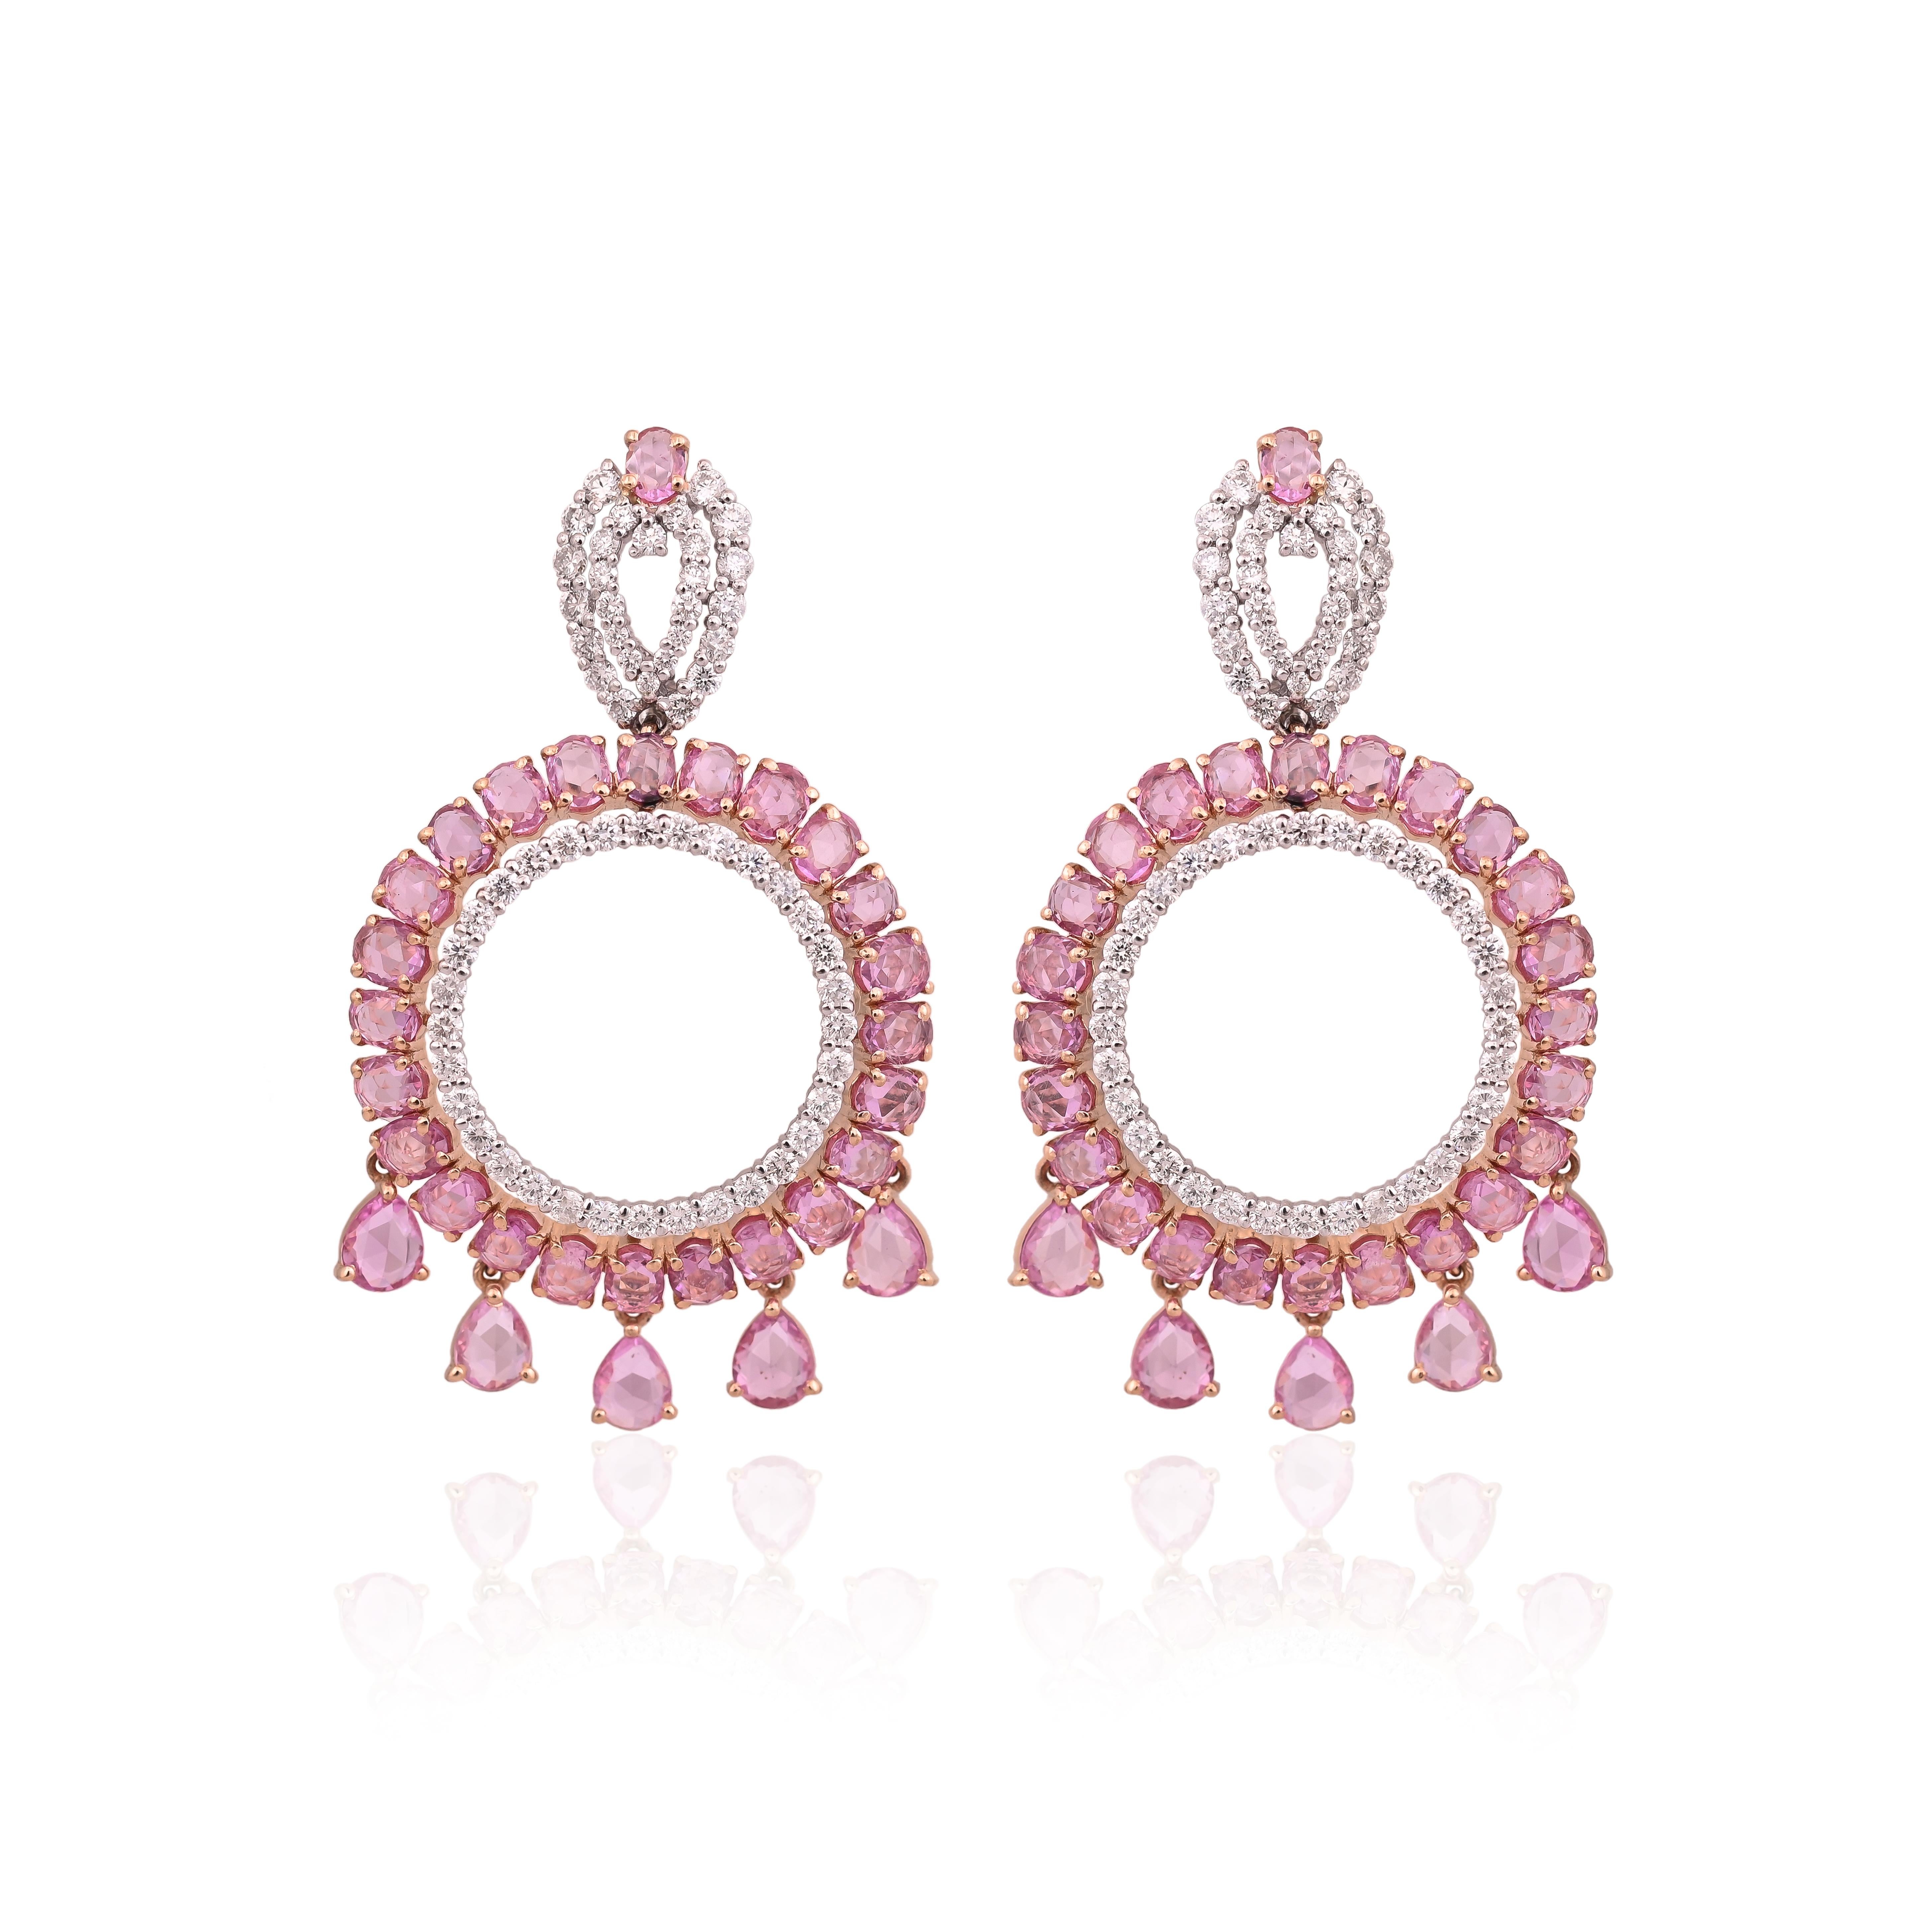 A very gorgeous and beautiful, Pink Sapphire Chandelier Earrings set in 18K White Gold & Diamonds. The weight of the Pink Sapphire Rose Cuts is 11.31 carats. The Pink Sapphires are of Ceylon (Sri Lanka) origin. The Diamonds weight is 2.35 carats.